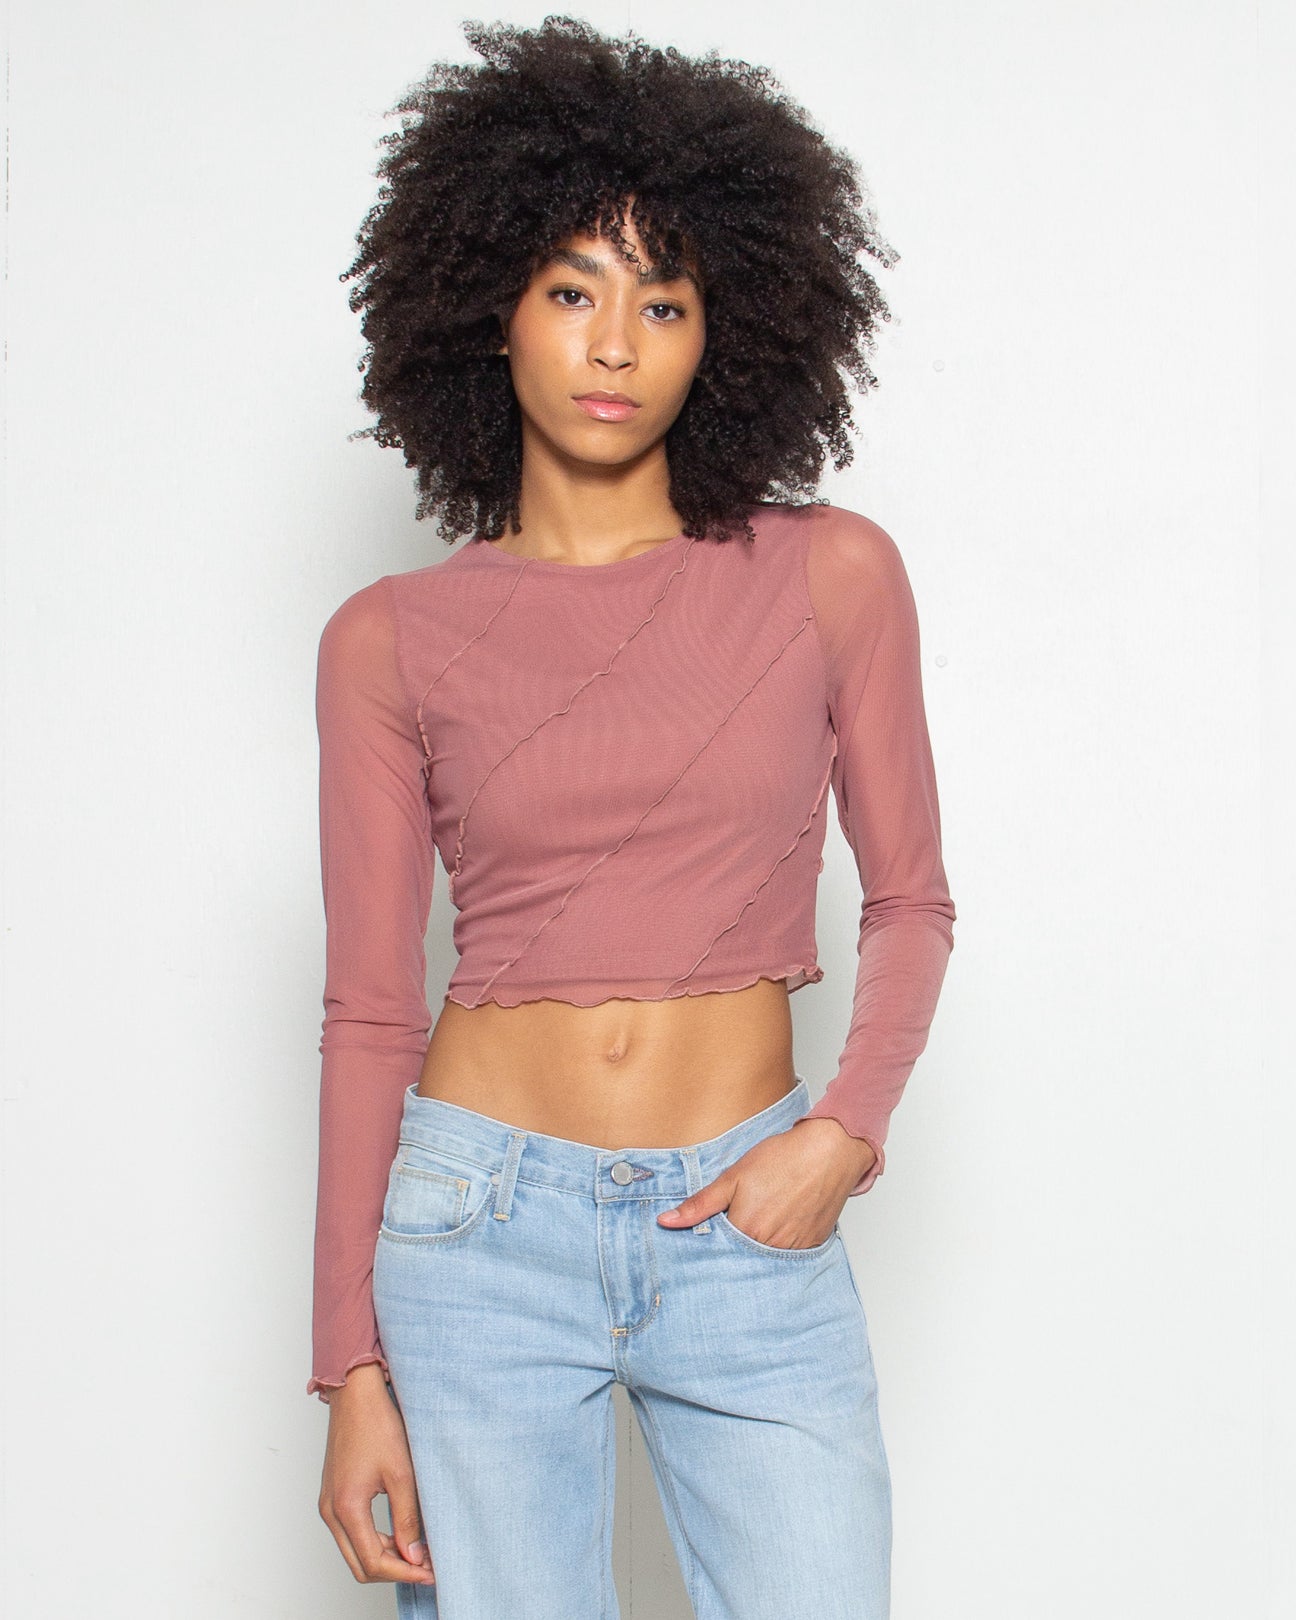 PERSONS Tabi Mesh Long Sleeve Tee in Light Orchid